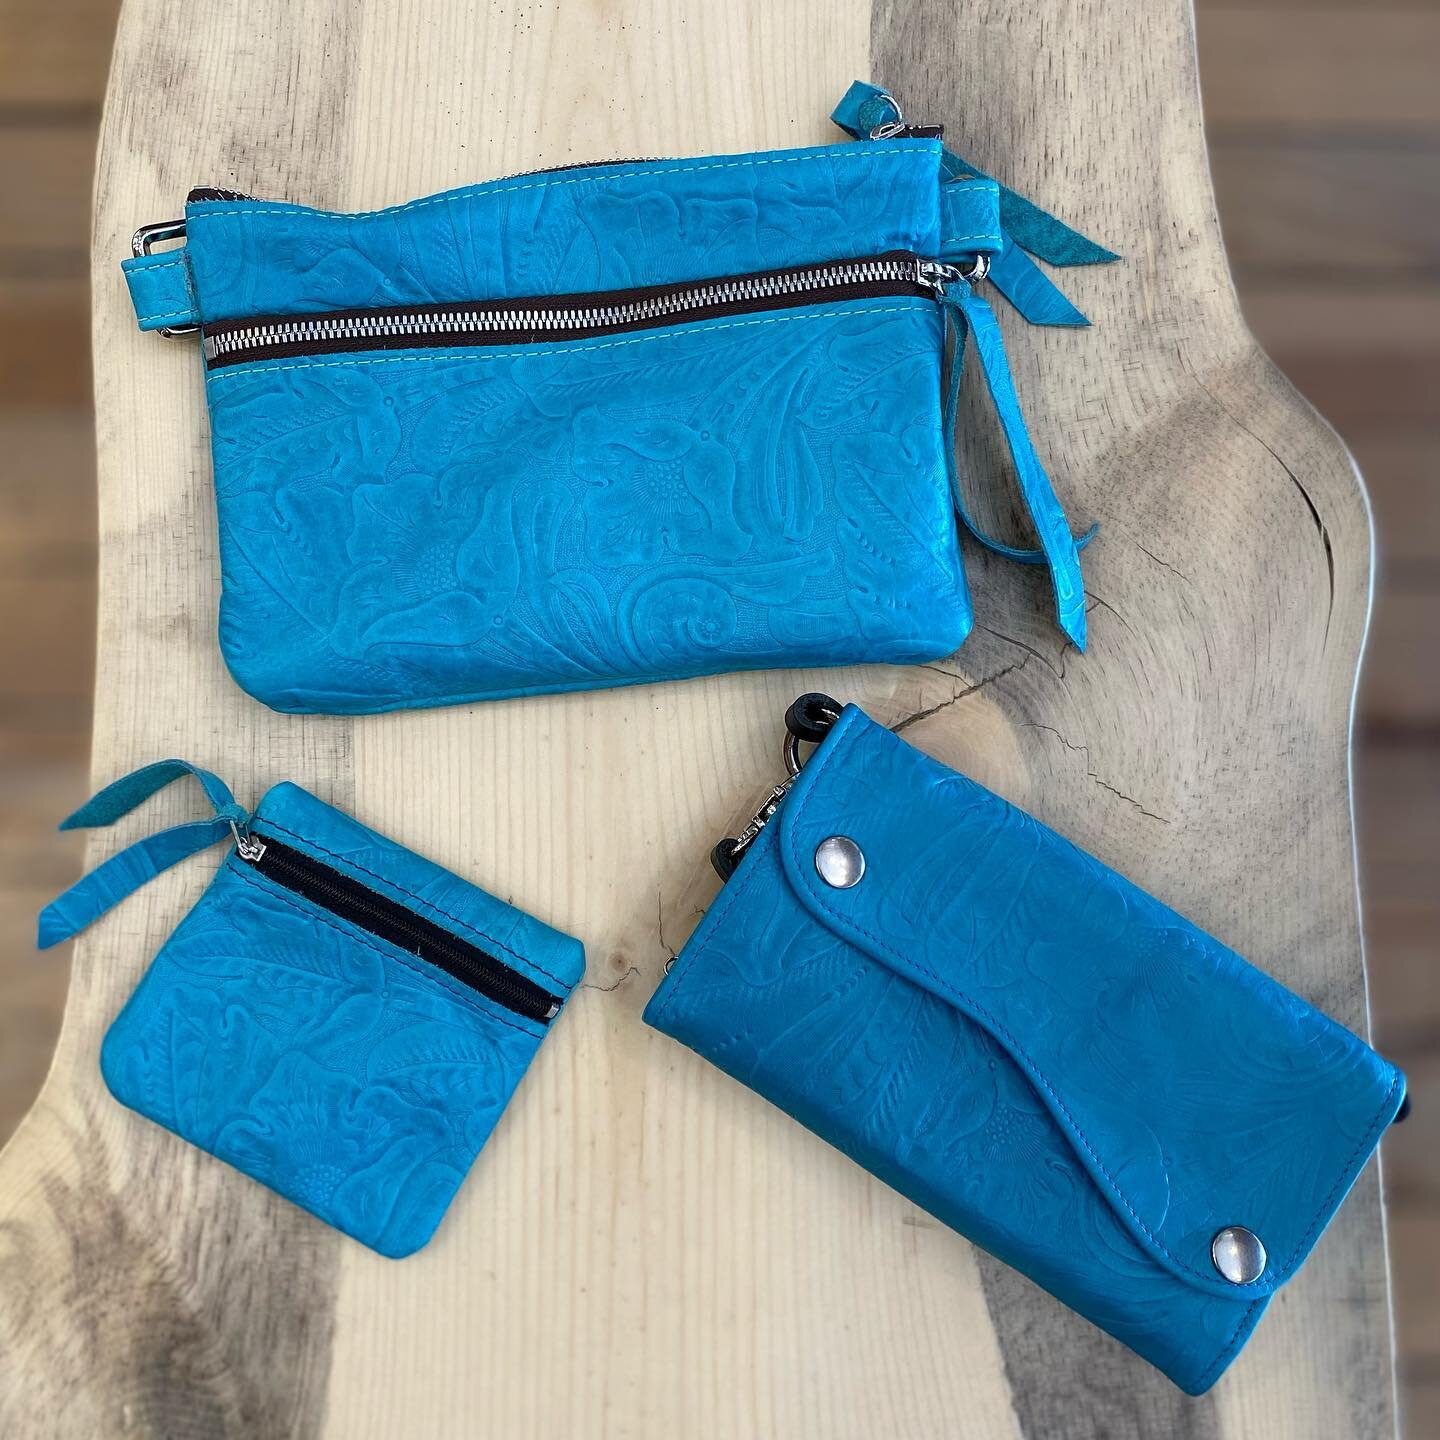 Just some turquoise embossed leather, one of my favorites to work with.  These are soft with a light texture that feel so good. #fannypack #cleopatra #claudio all @riversidestudios